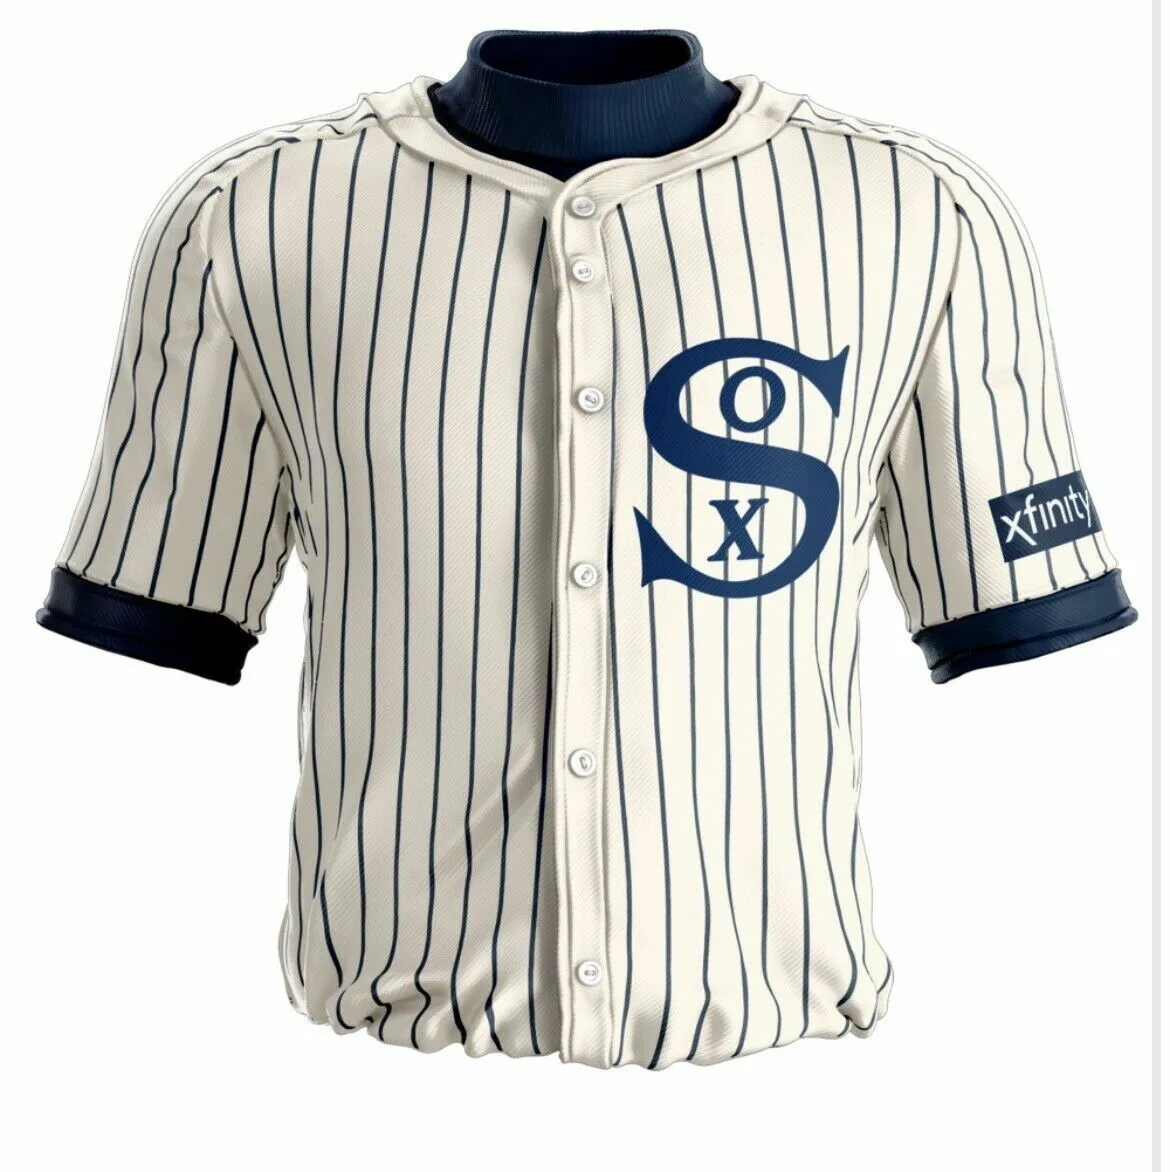 Chicago White Sox 1919 SGA Jersey Free Shiping BRND NEW UNOPENED POLYBAG M  OR L